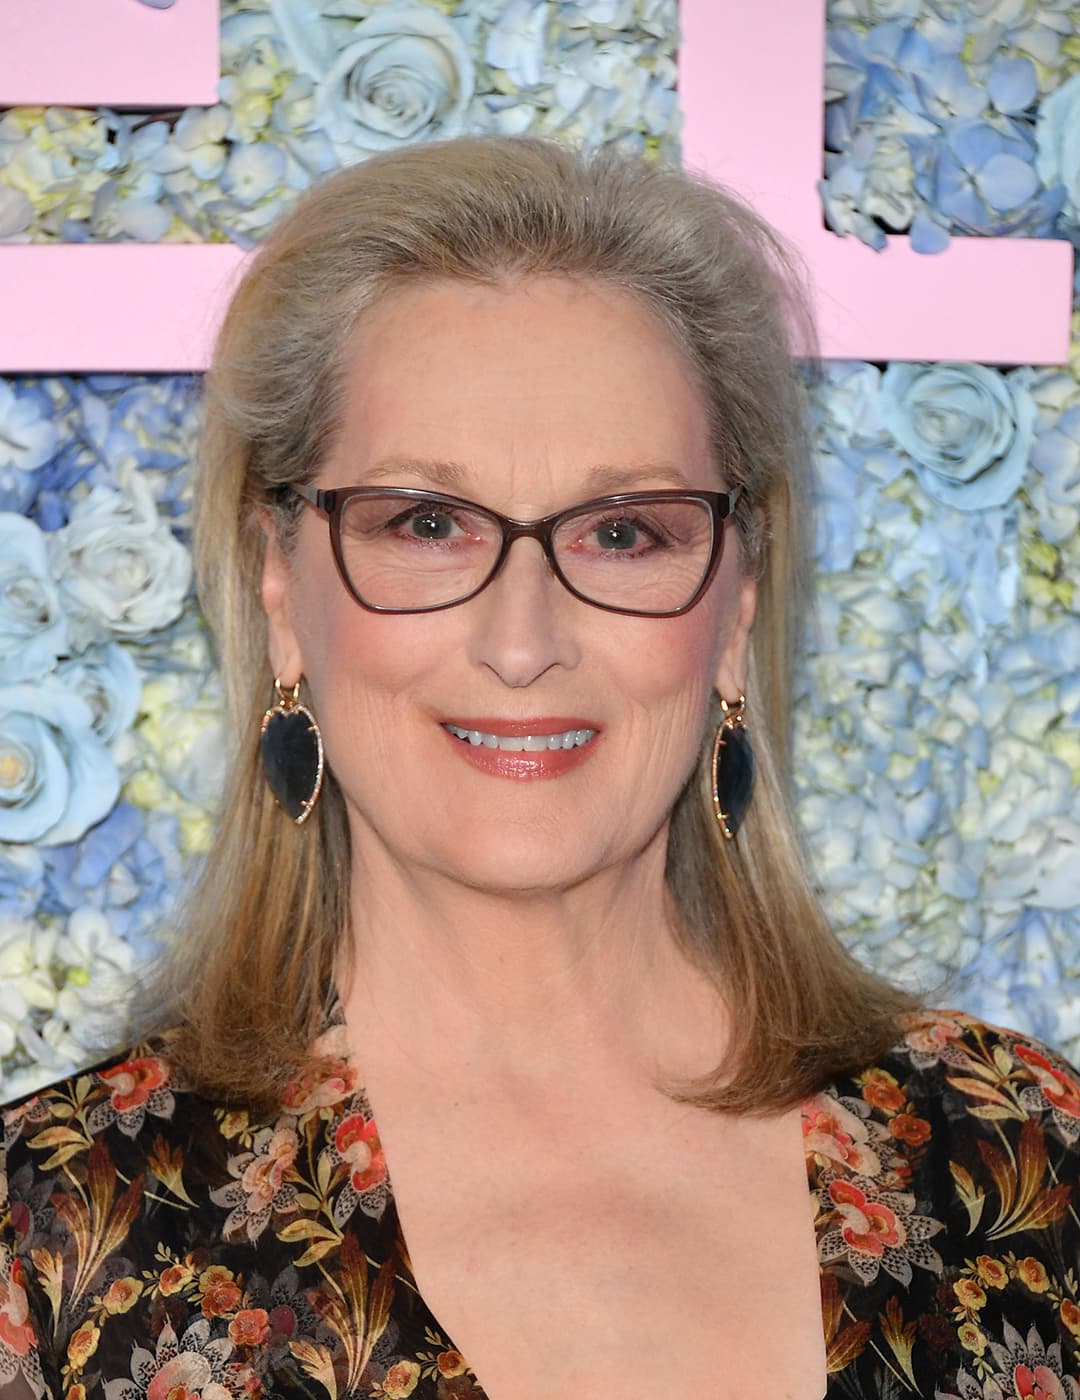 A photo of Meryl Streep wearing a classic black eyeglasses, black earing and a black floral see through dress along with her classic mid-length style hairstyle 